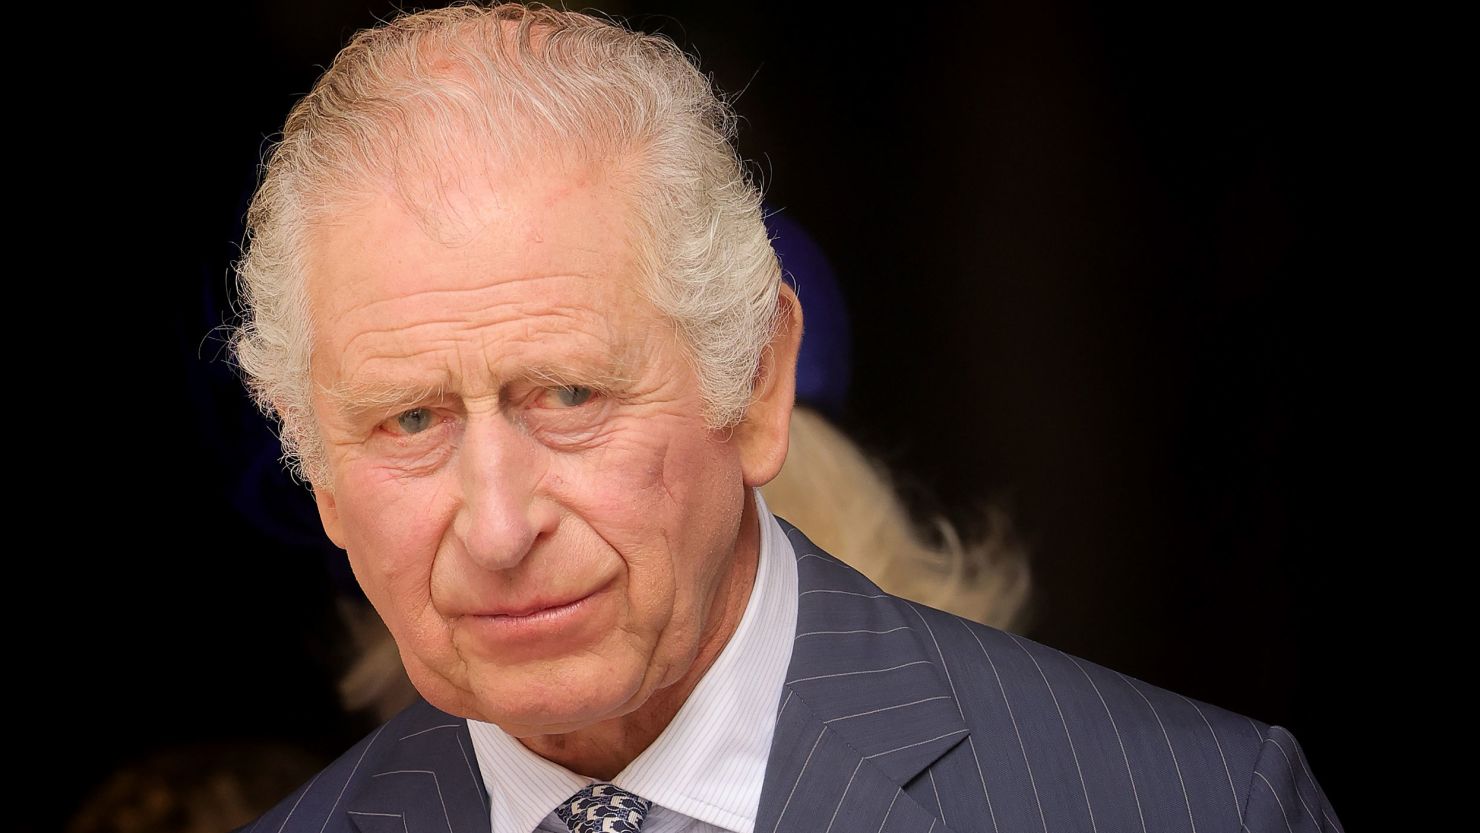 King Charles III attends the 2023 Commonwealth Day Service at Westminster Abbey on March 13, 2023 in London, England.